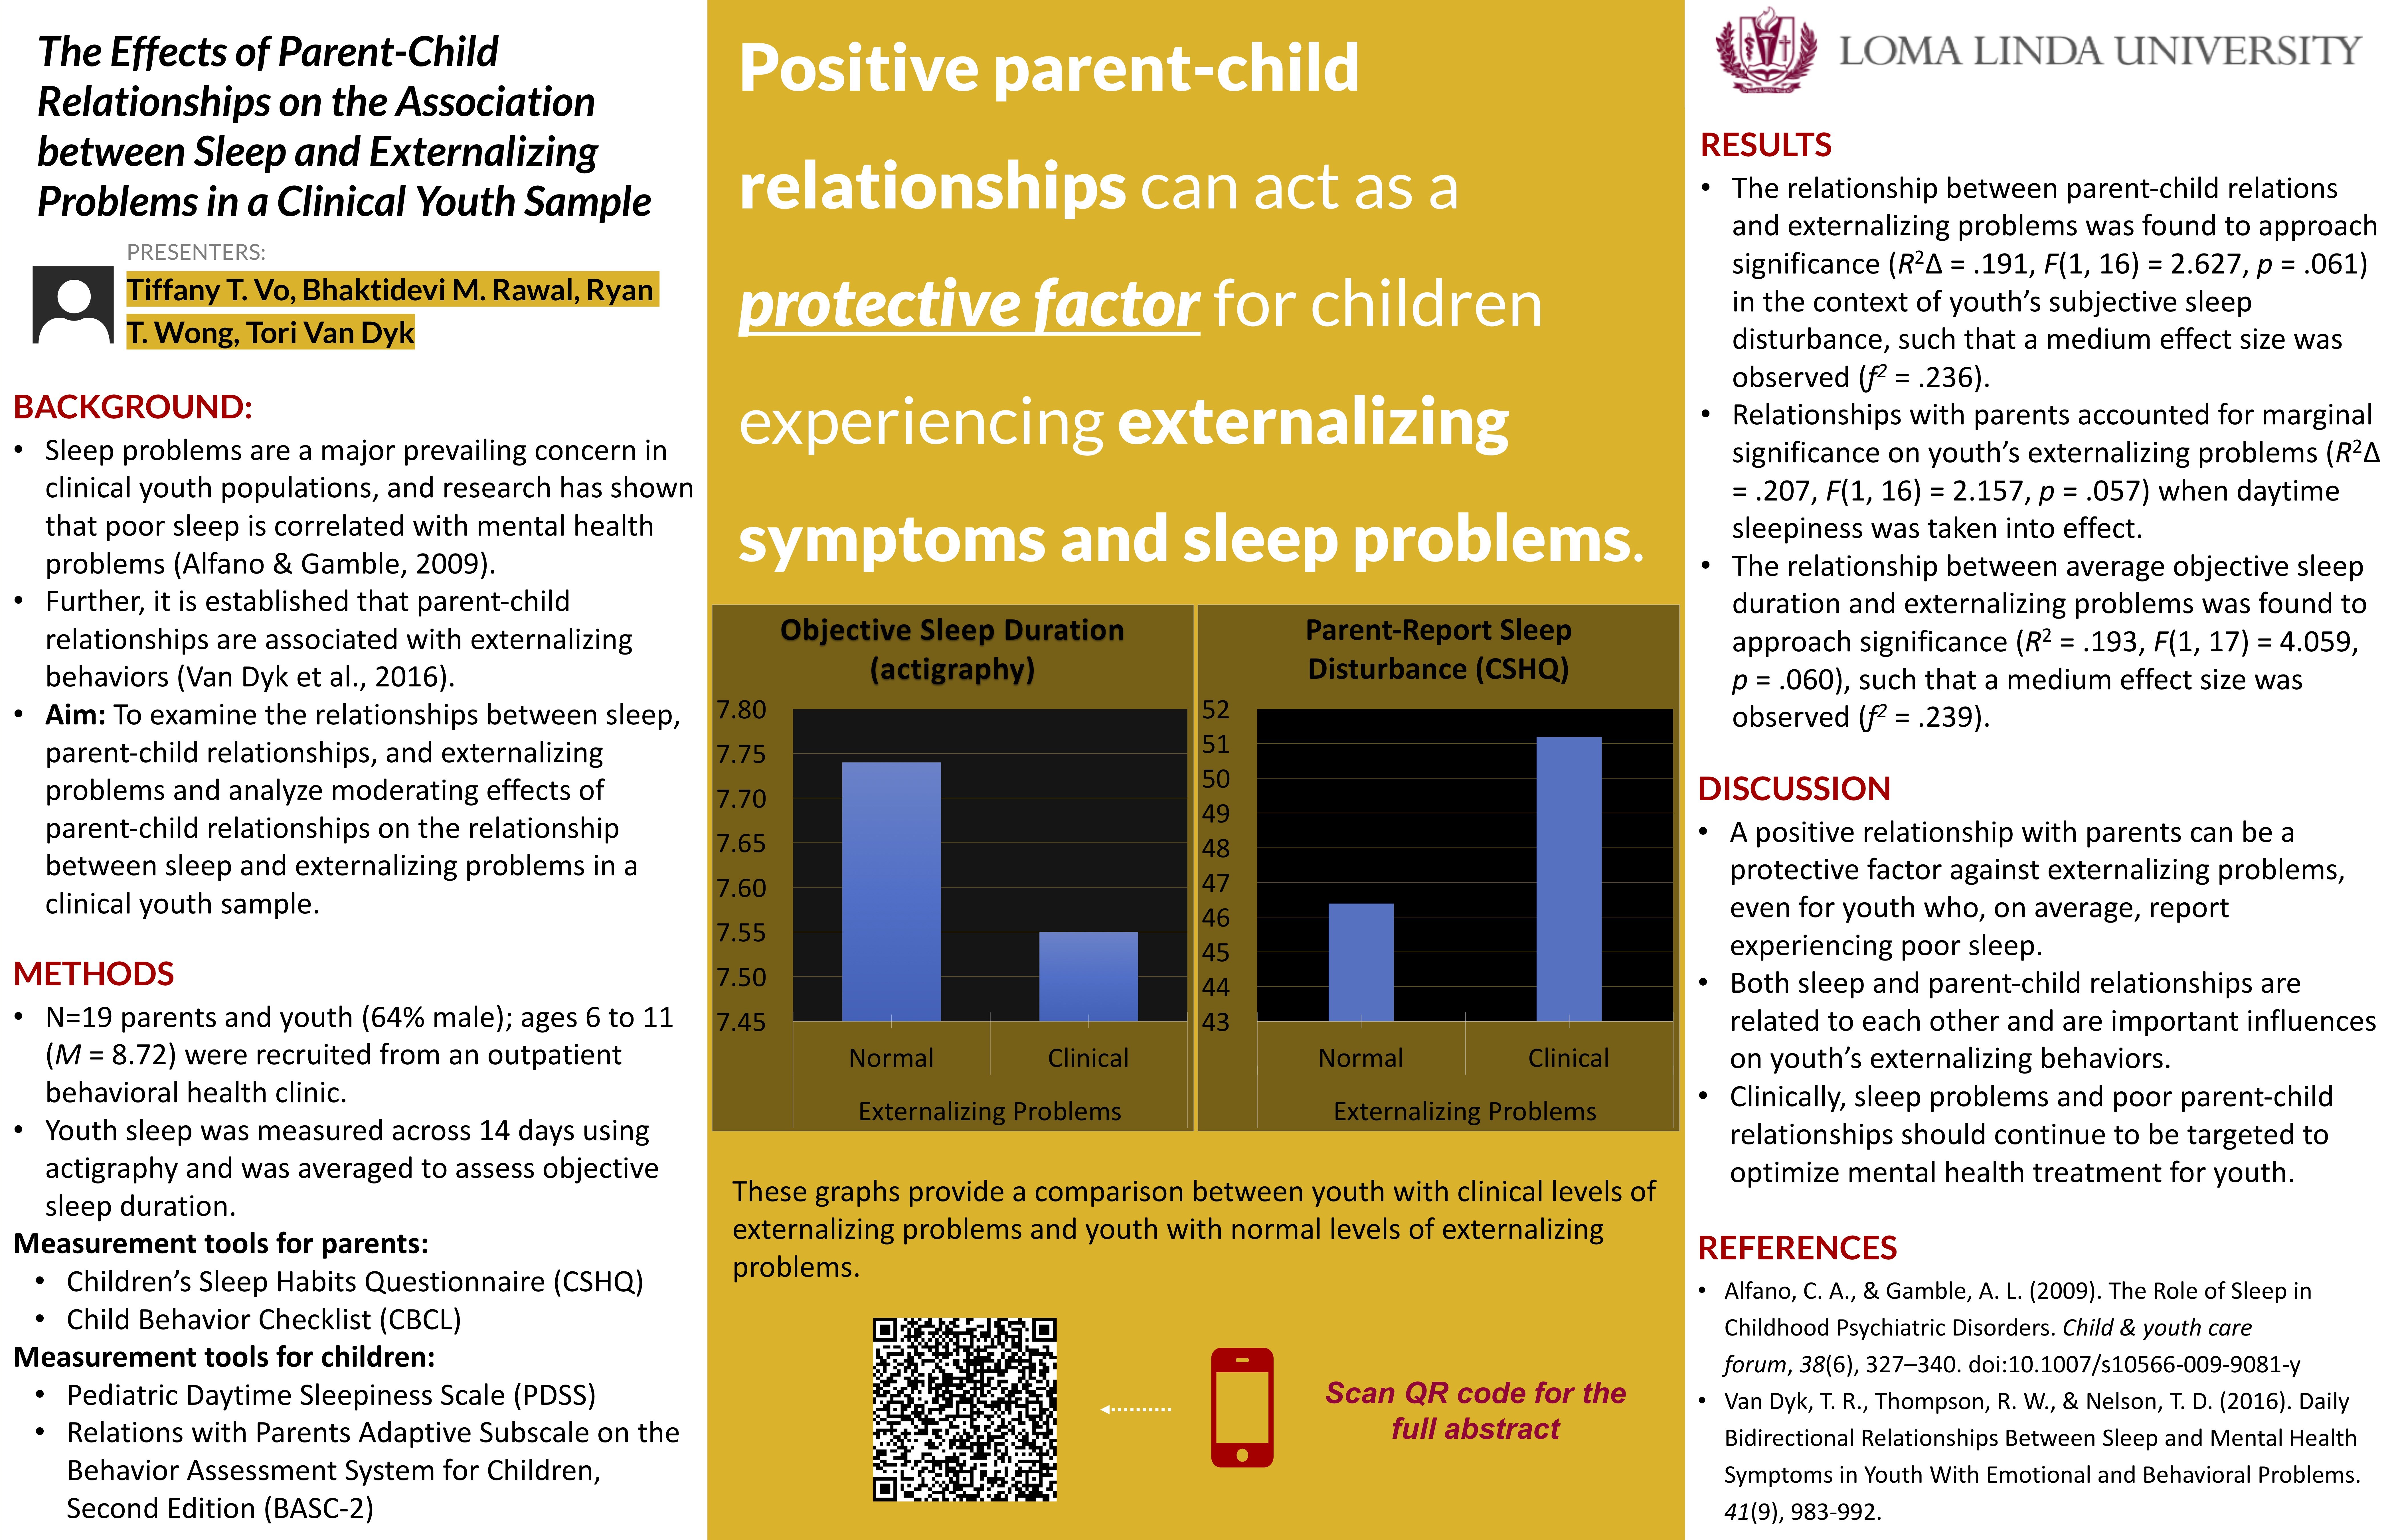 The Effects Of Parent Child Relationships On The Association Between Sleep And Externalizing Problems In A Clinical Youth Sample Llupediatrichealthlab